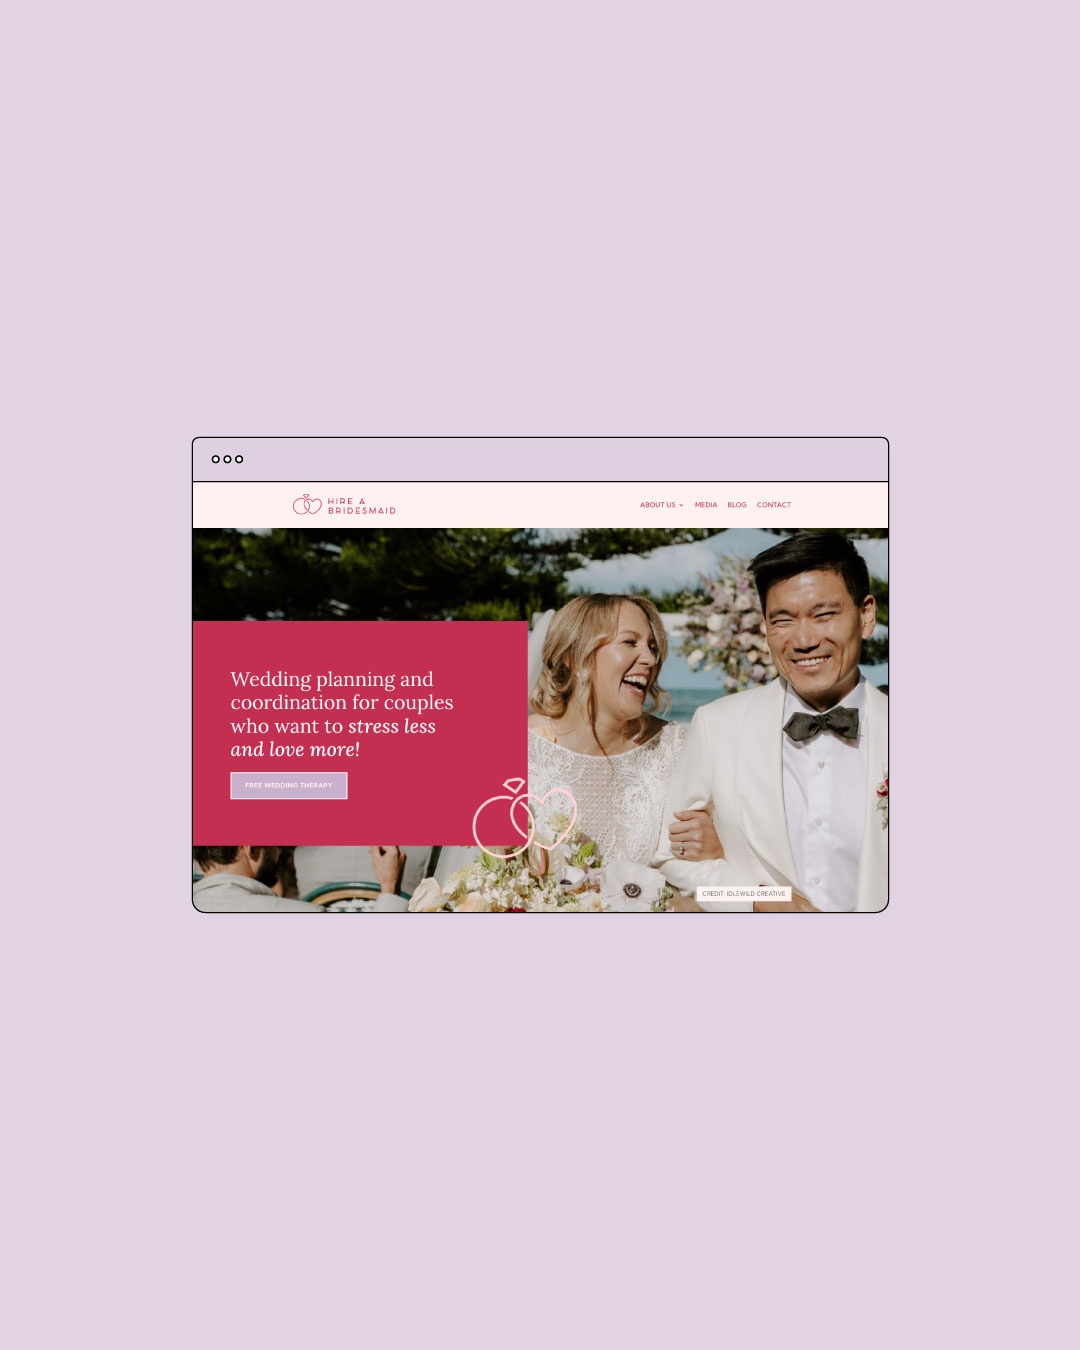 Hire A Bridesmaid website redesign by NPCreative Group